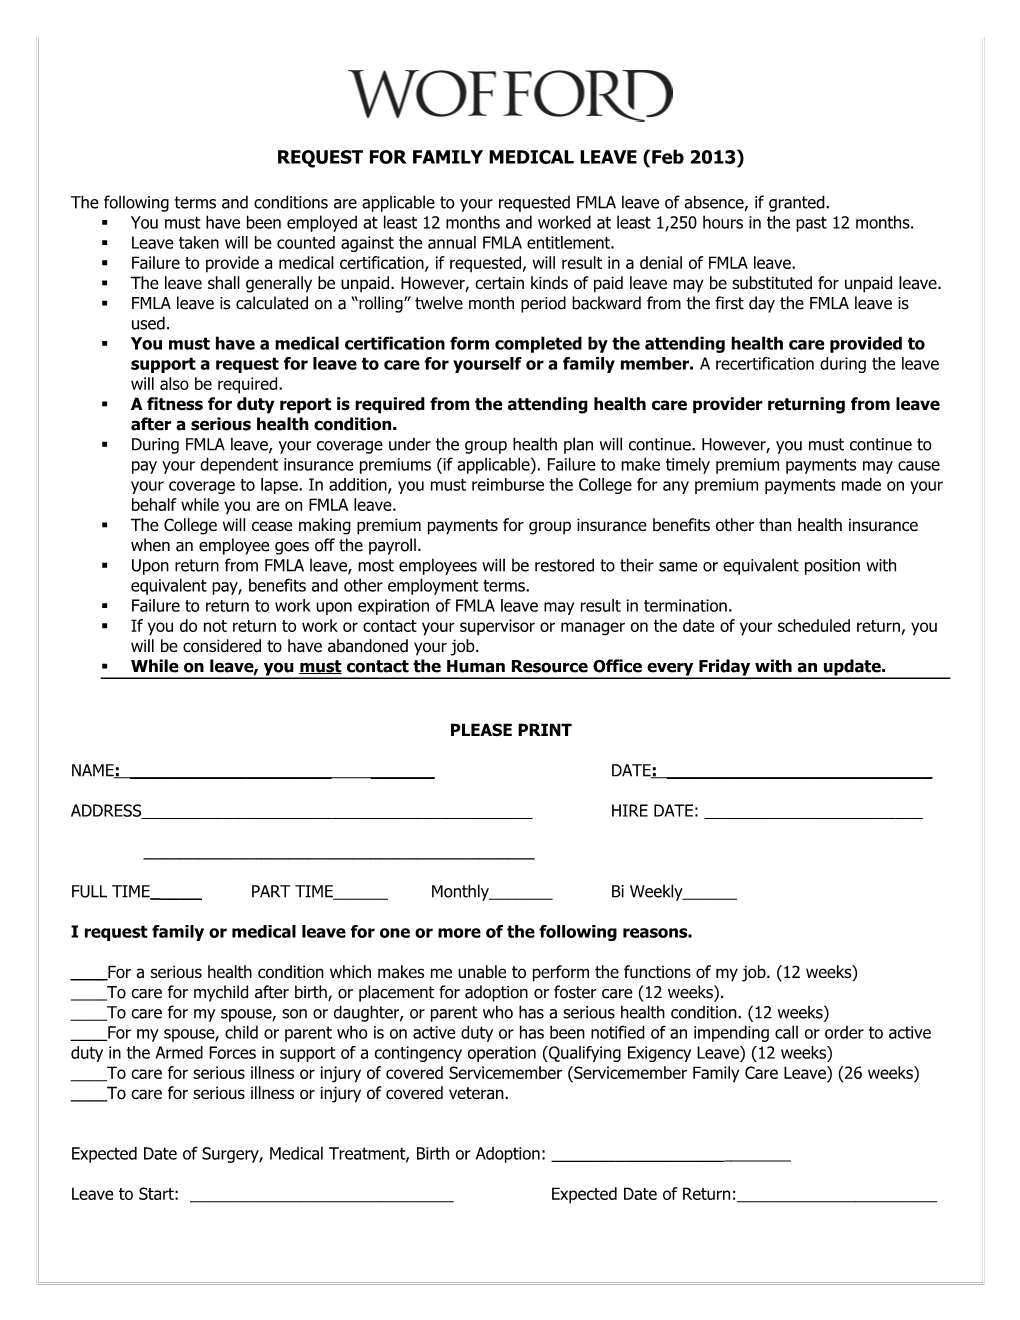 REQUEST for FAMILYMEDICAL LEAVE (Feb 2013)